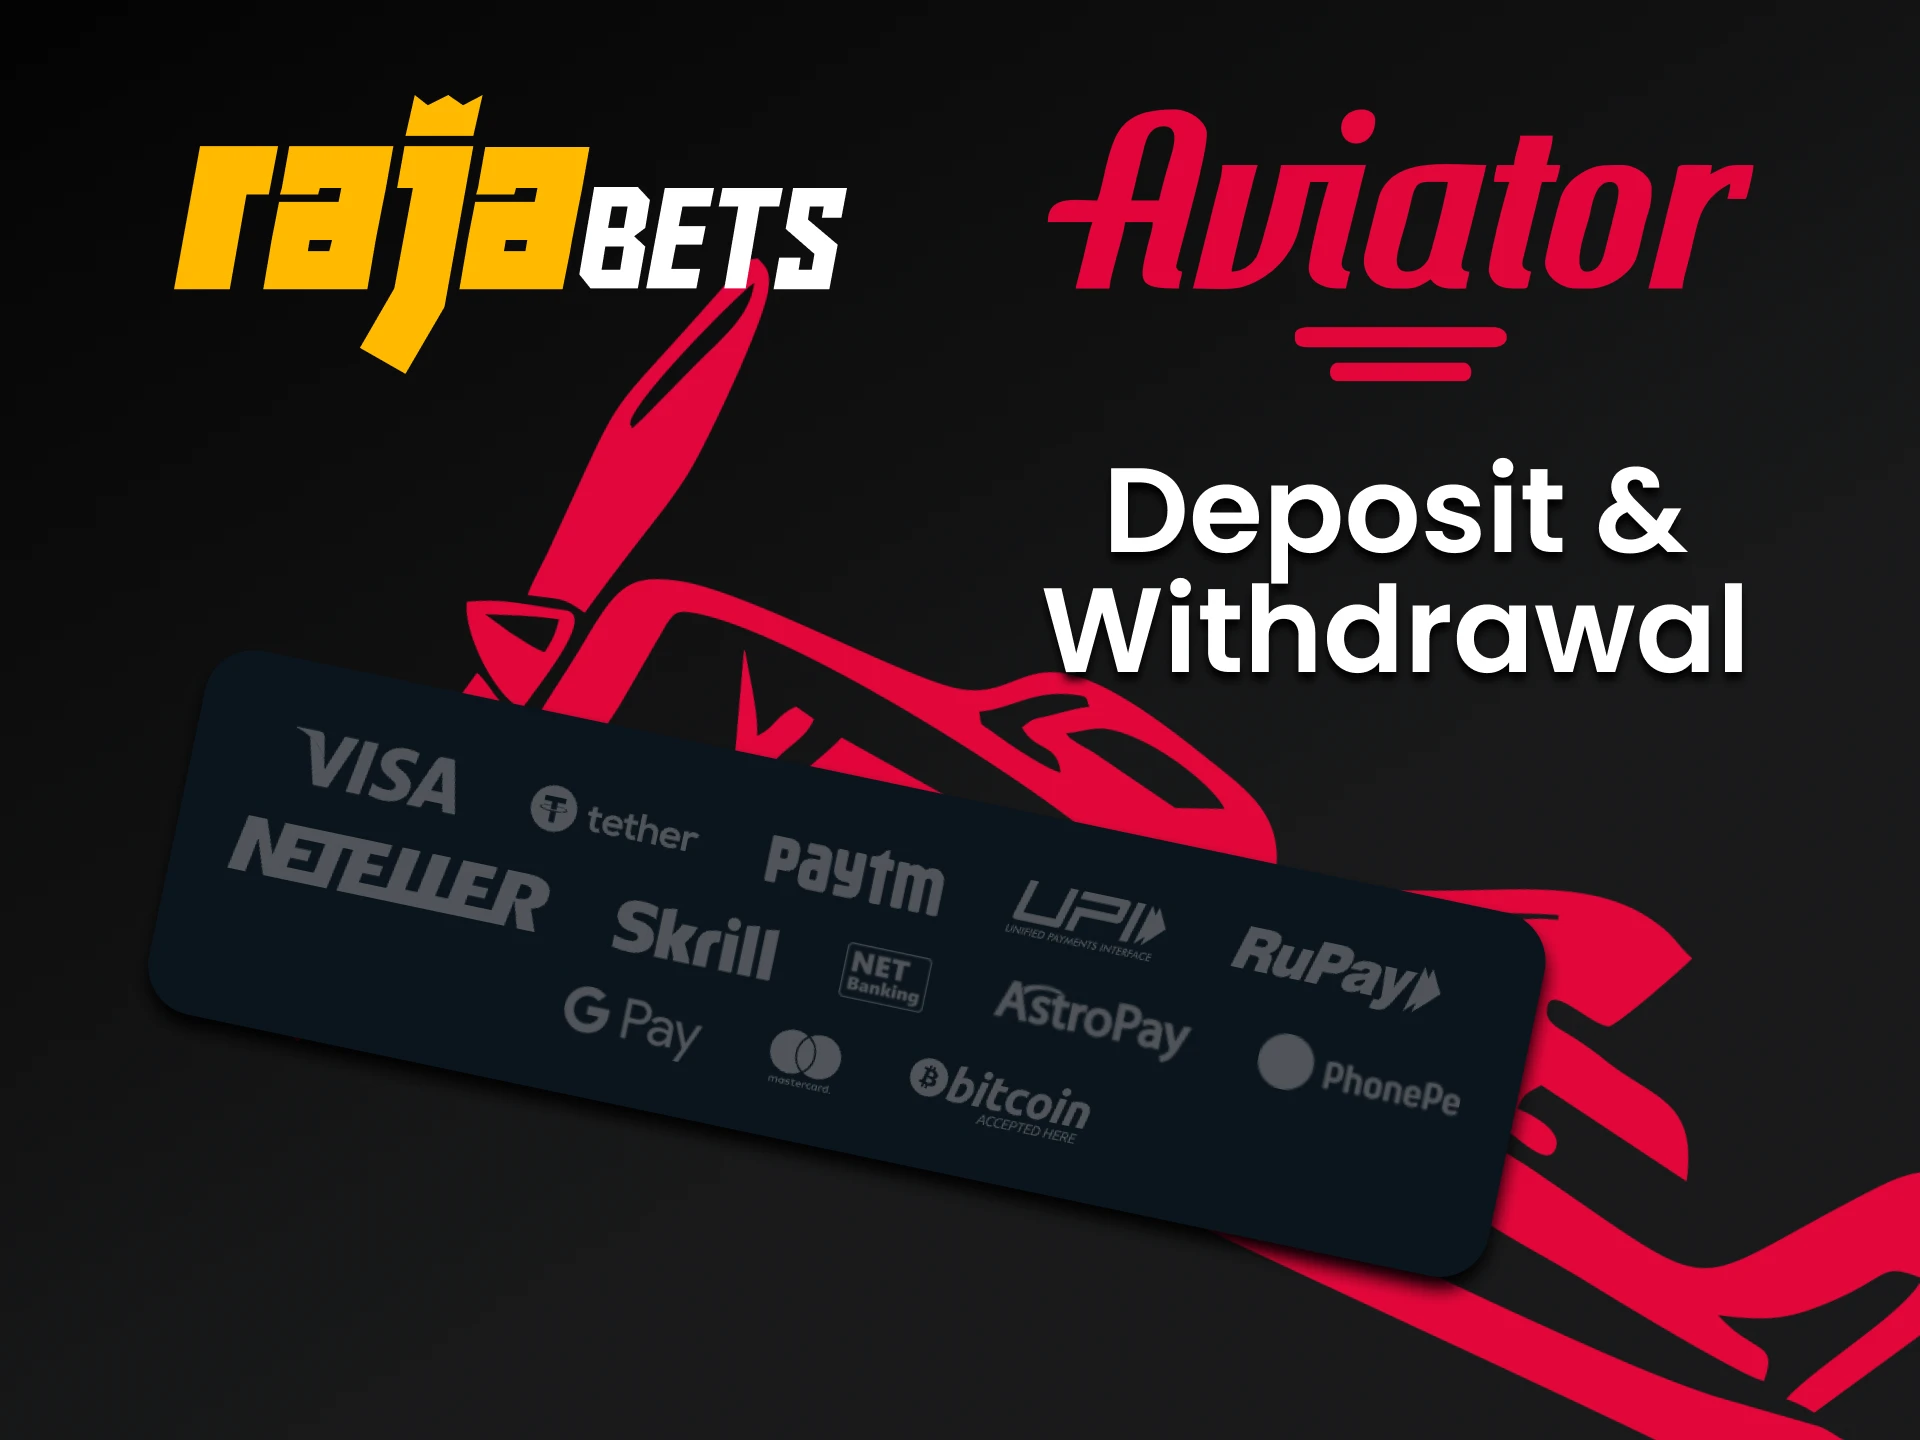 Choose a convenient way of transactions from Rajabets for Aviator.